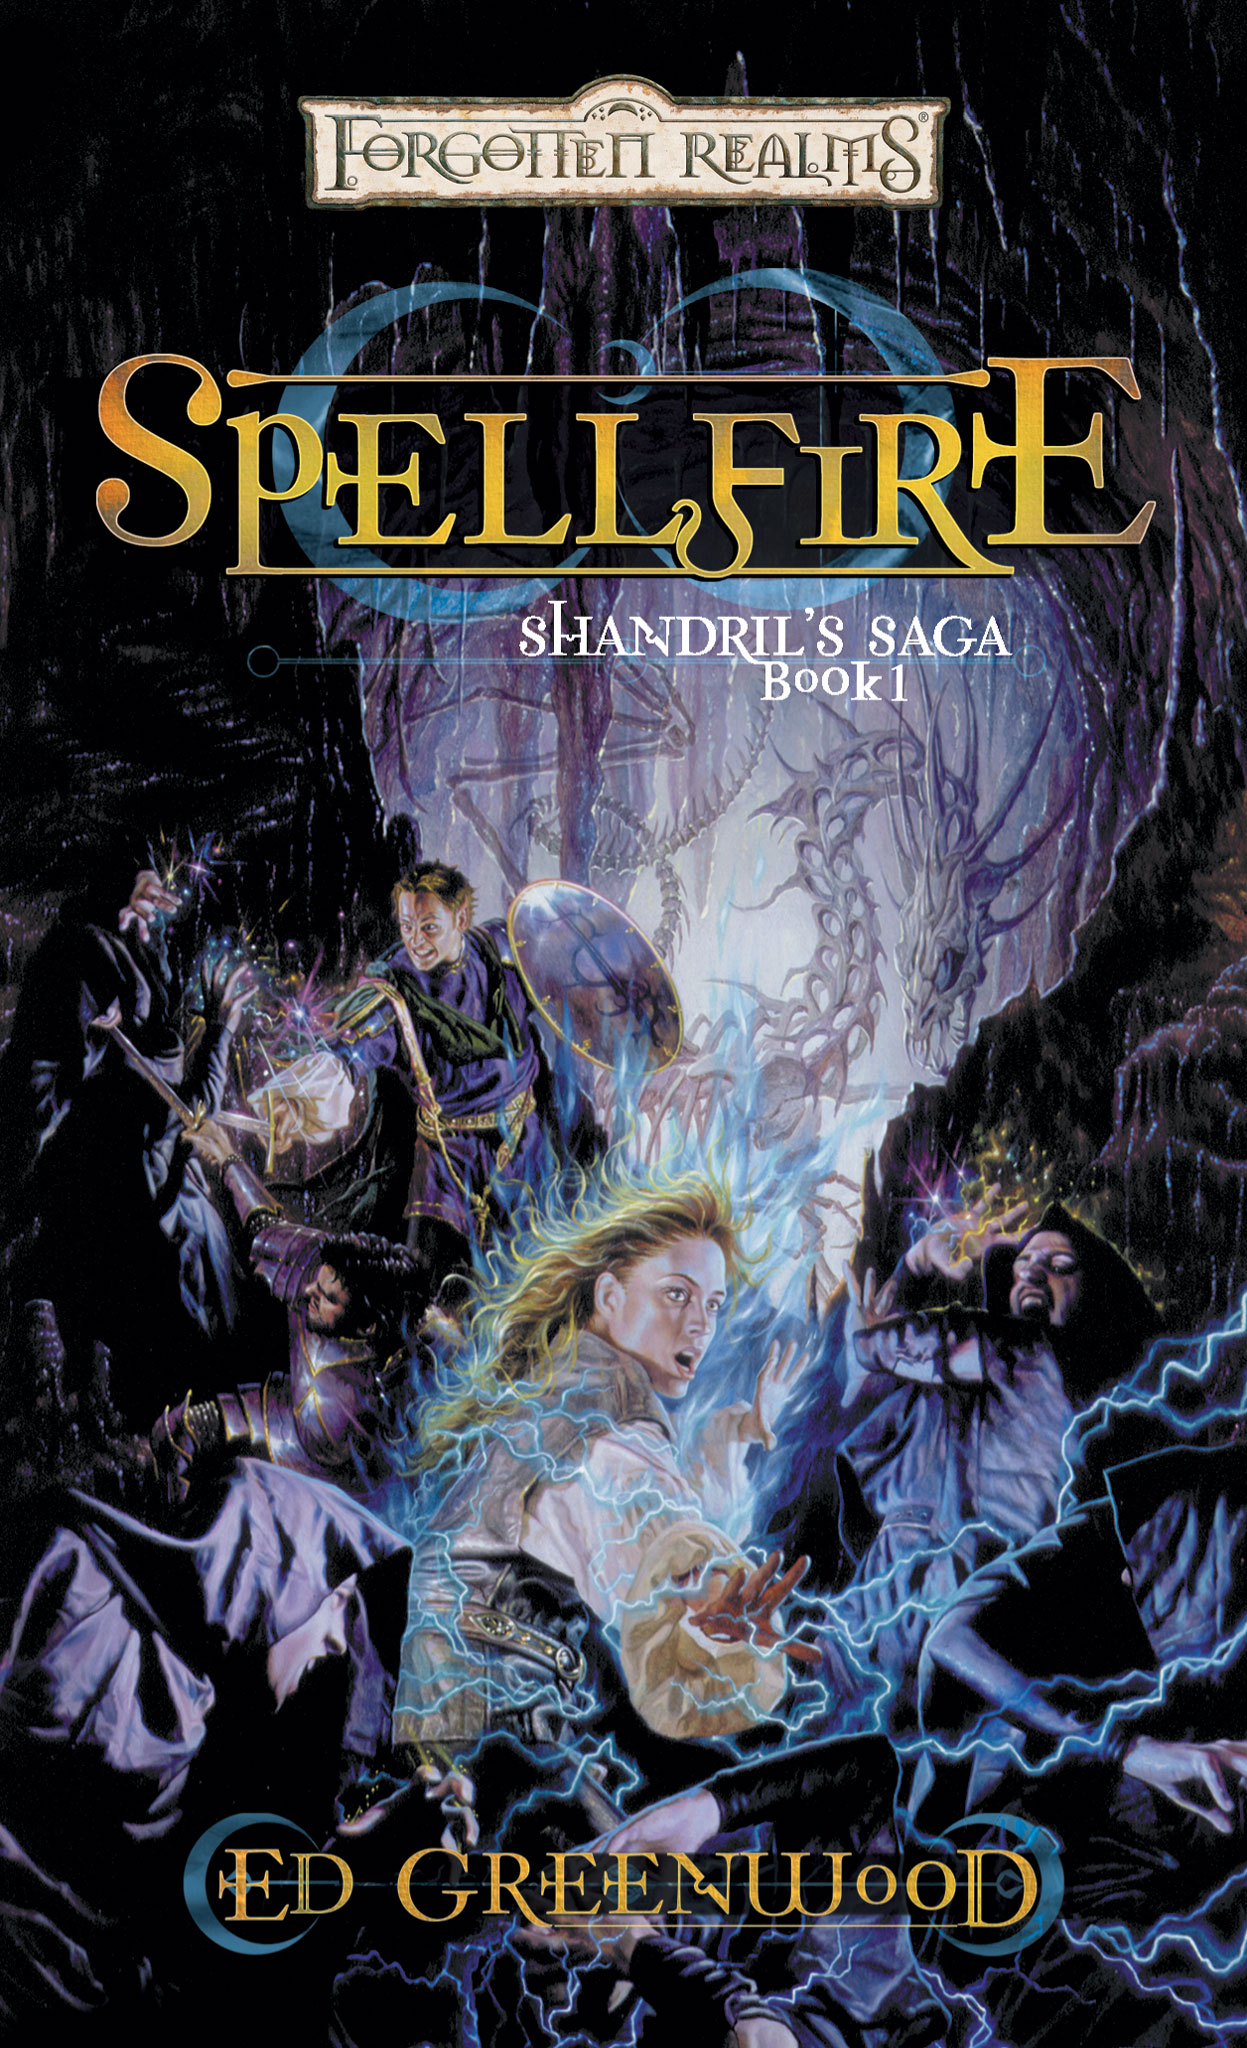 The cover of the 2005 reprint, with art by Jon Sullivan. (Image: Wizards of the Coast)